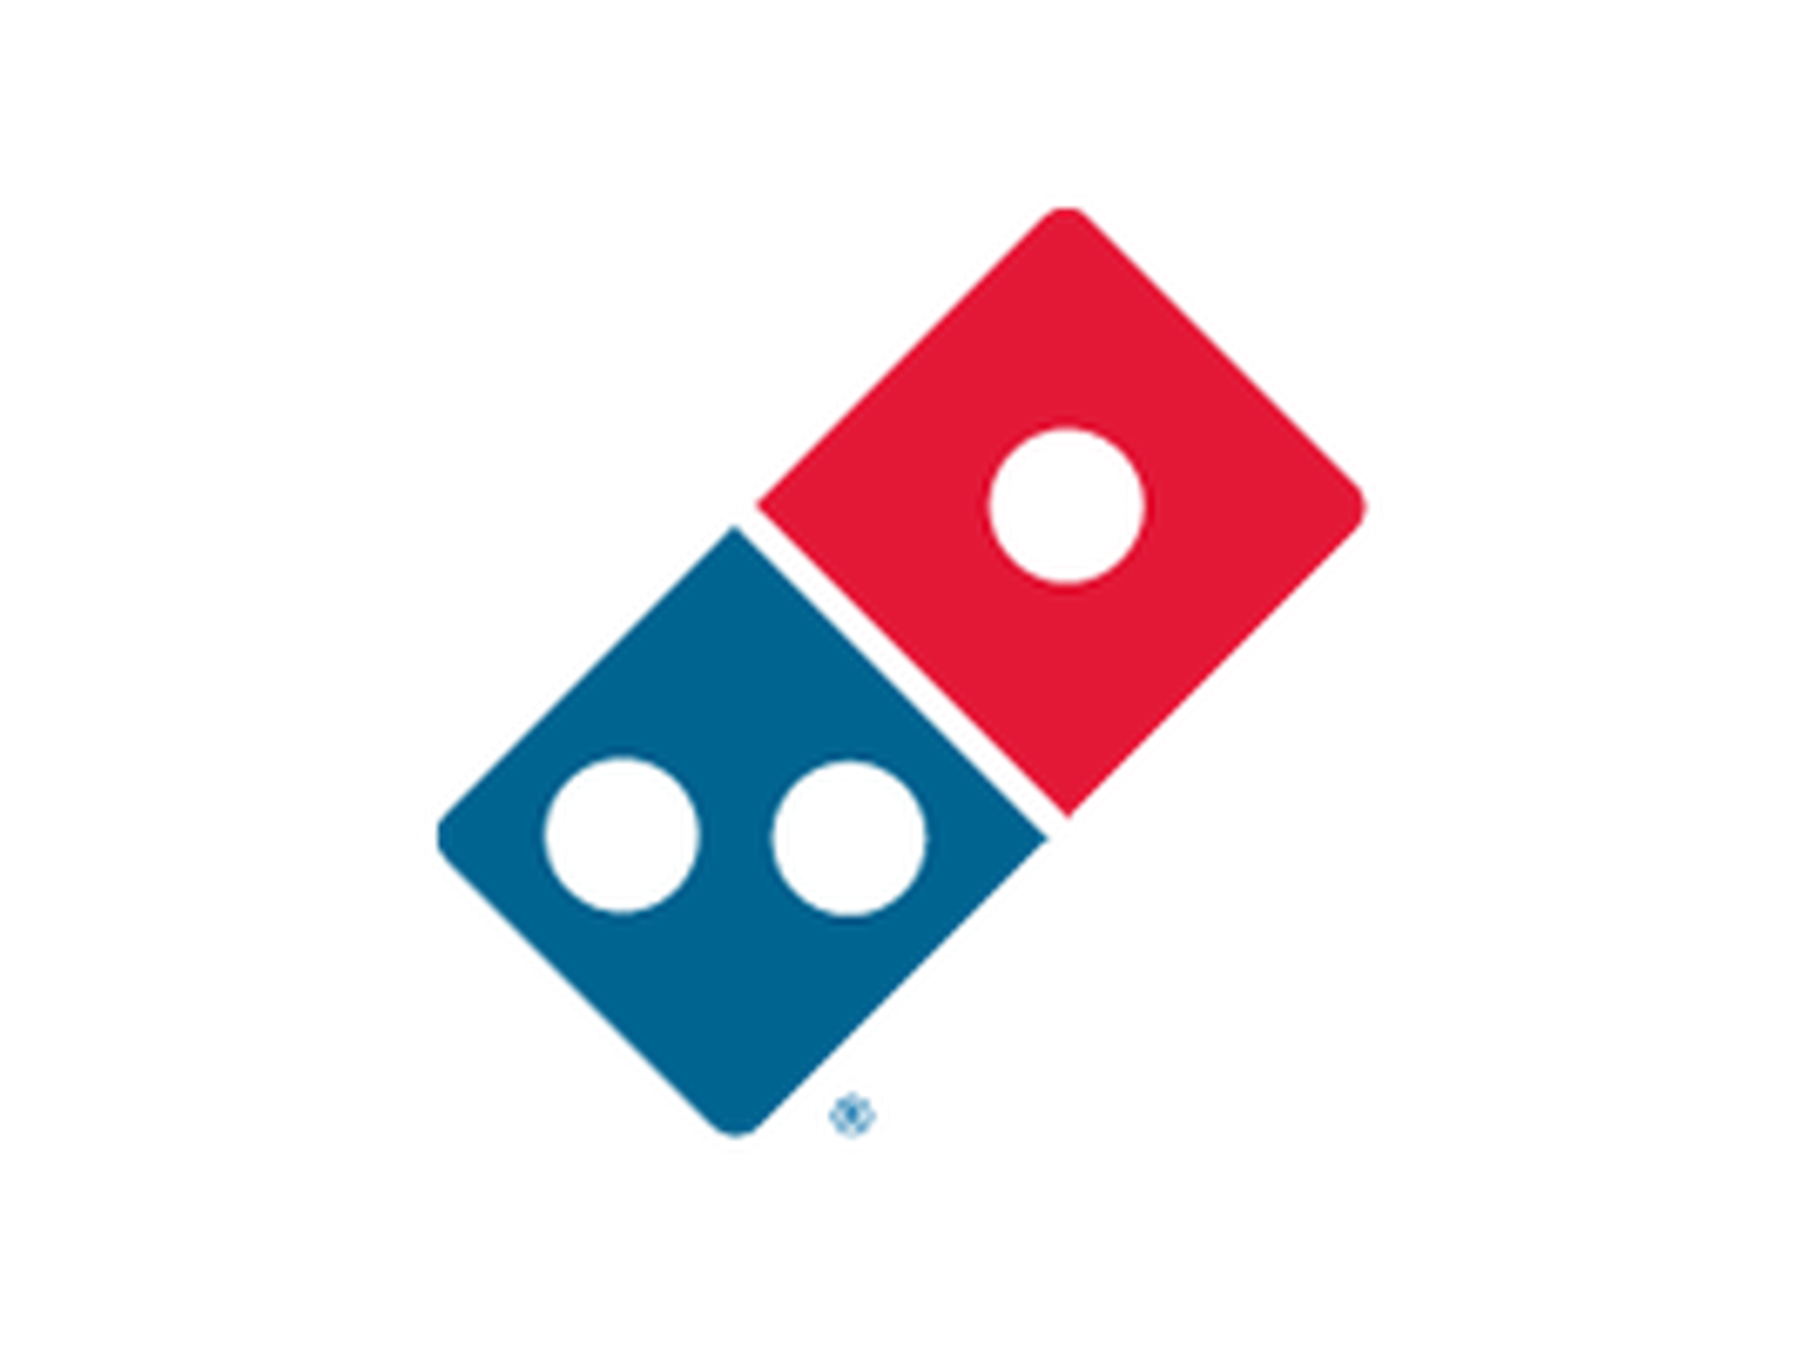 Domino's Coupons